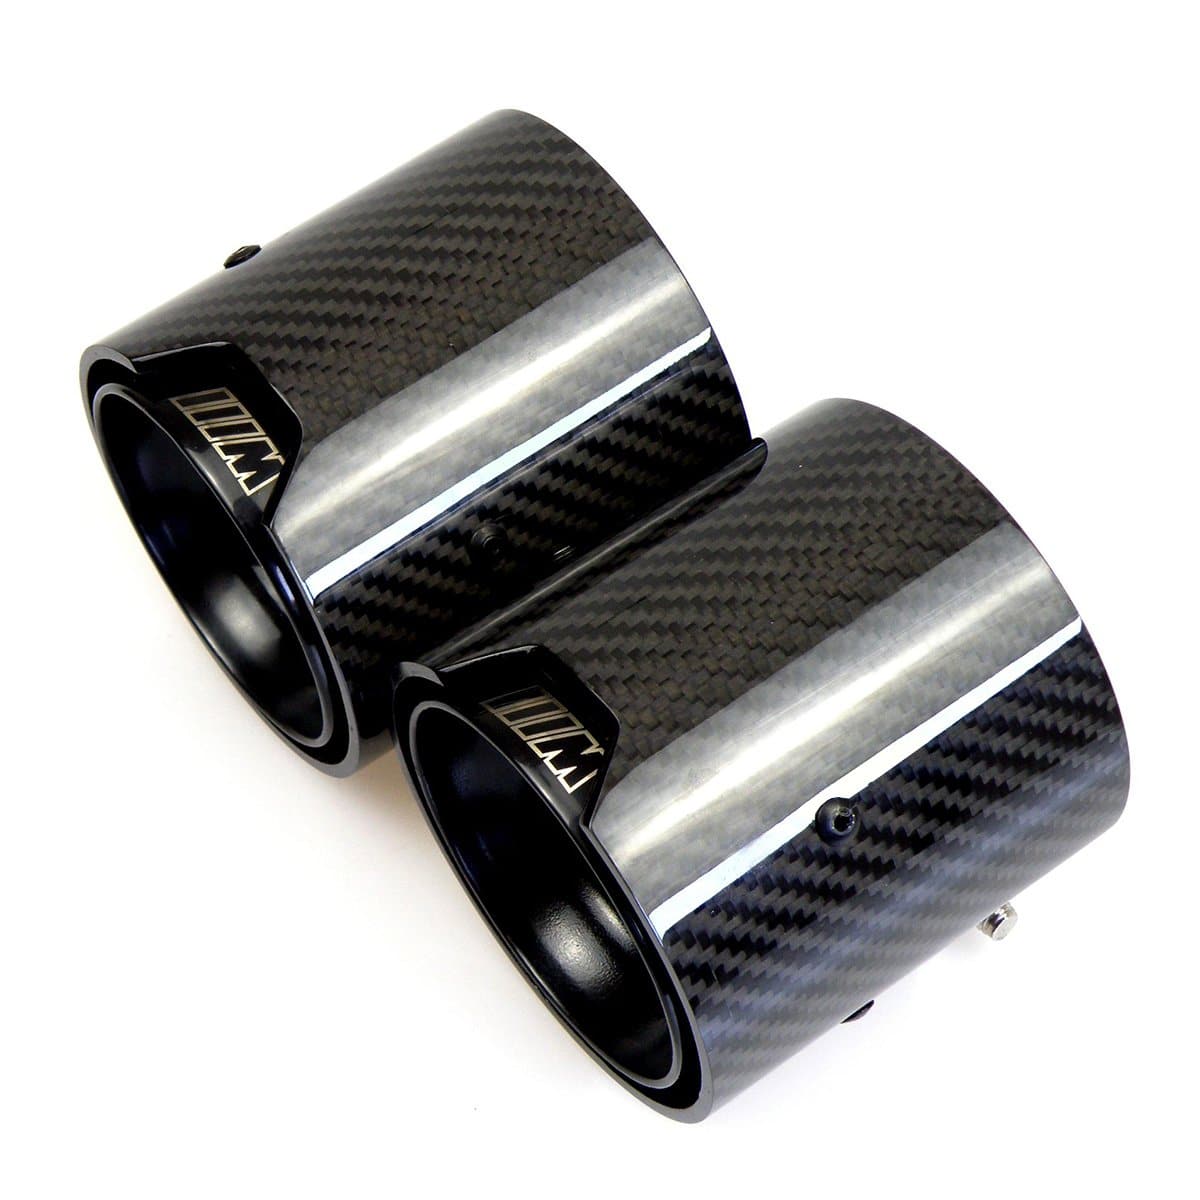  BMW M5 (F90/F90N) Black M Performance Carbon Fibre Exhaust Tips - Designed in the M Performance Styling for the M Series BMW Models These exhaust tips are a combination of either a Matt Carbon or Gloss Carbon Shell finished with High-Temperature Gloss Black Paint Finish with a laser-etched M Logo creating a stunning finish to all M Series BMW Models. 